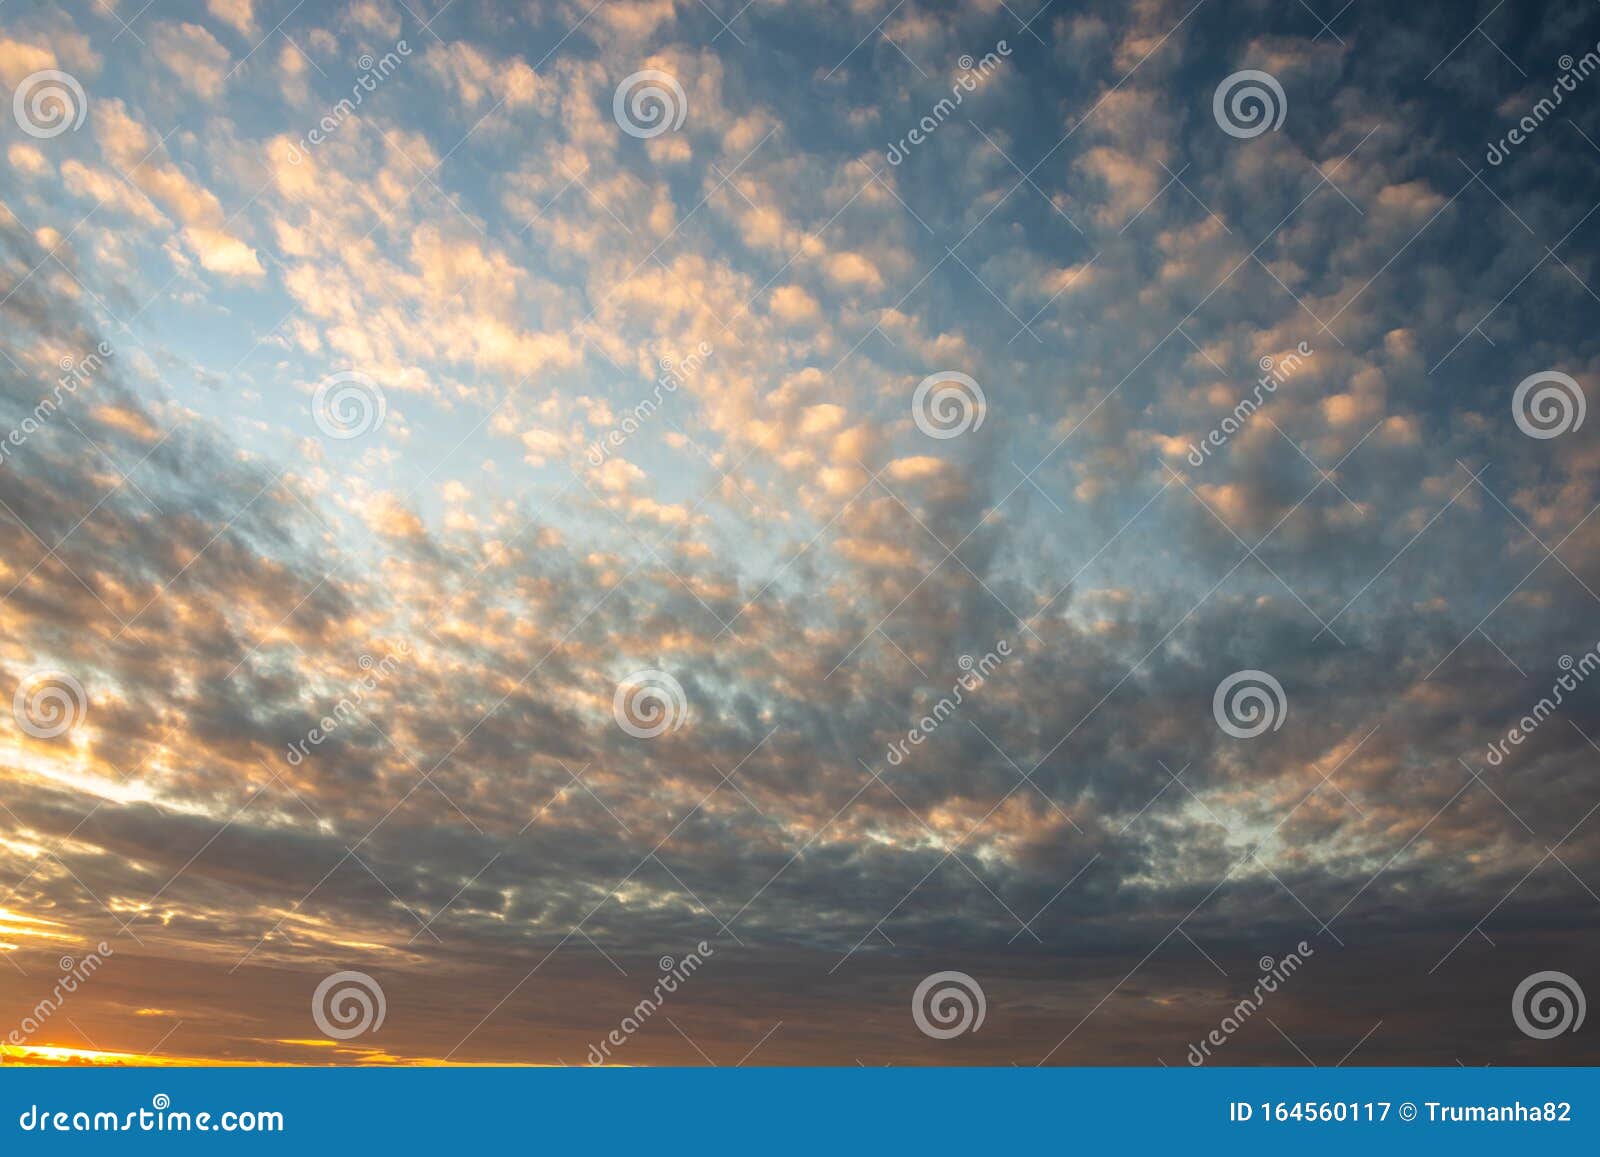 Colorful And Dramatic Clouds In Sky At Sunrise Stock Image Image Of Blue Desktop